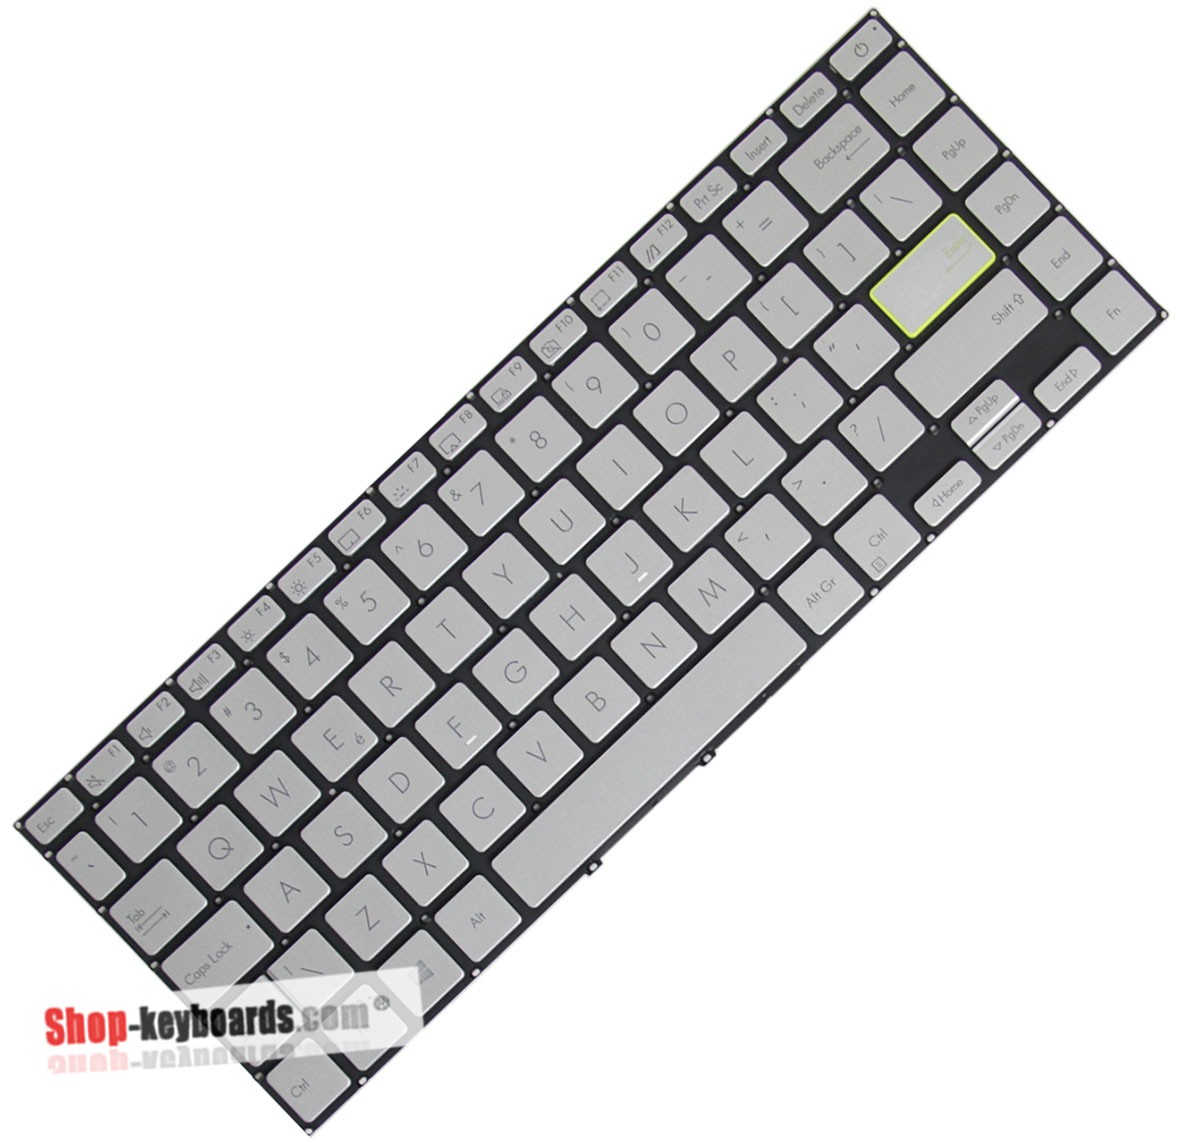 Asus 0KNB0-260NHE00  Keyboard replacement